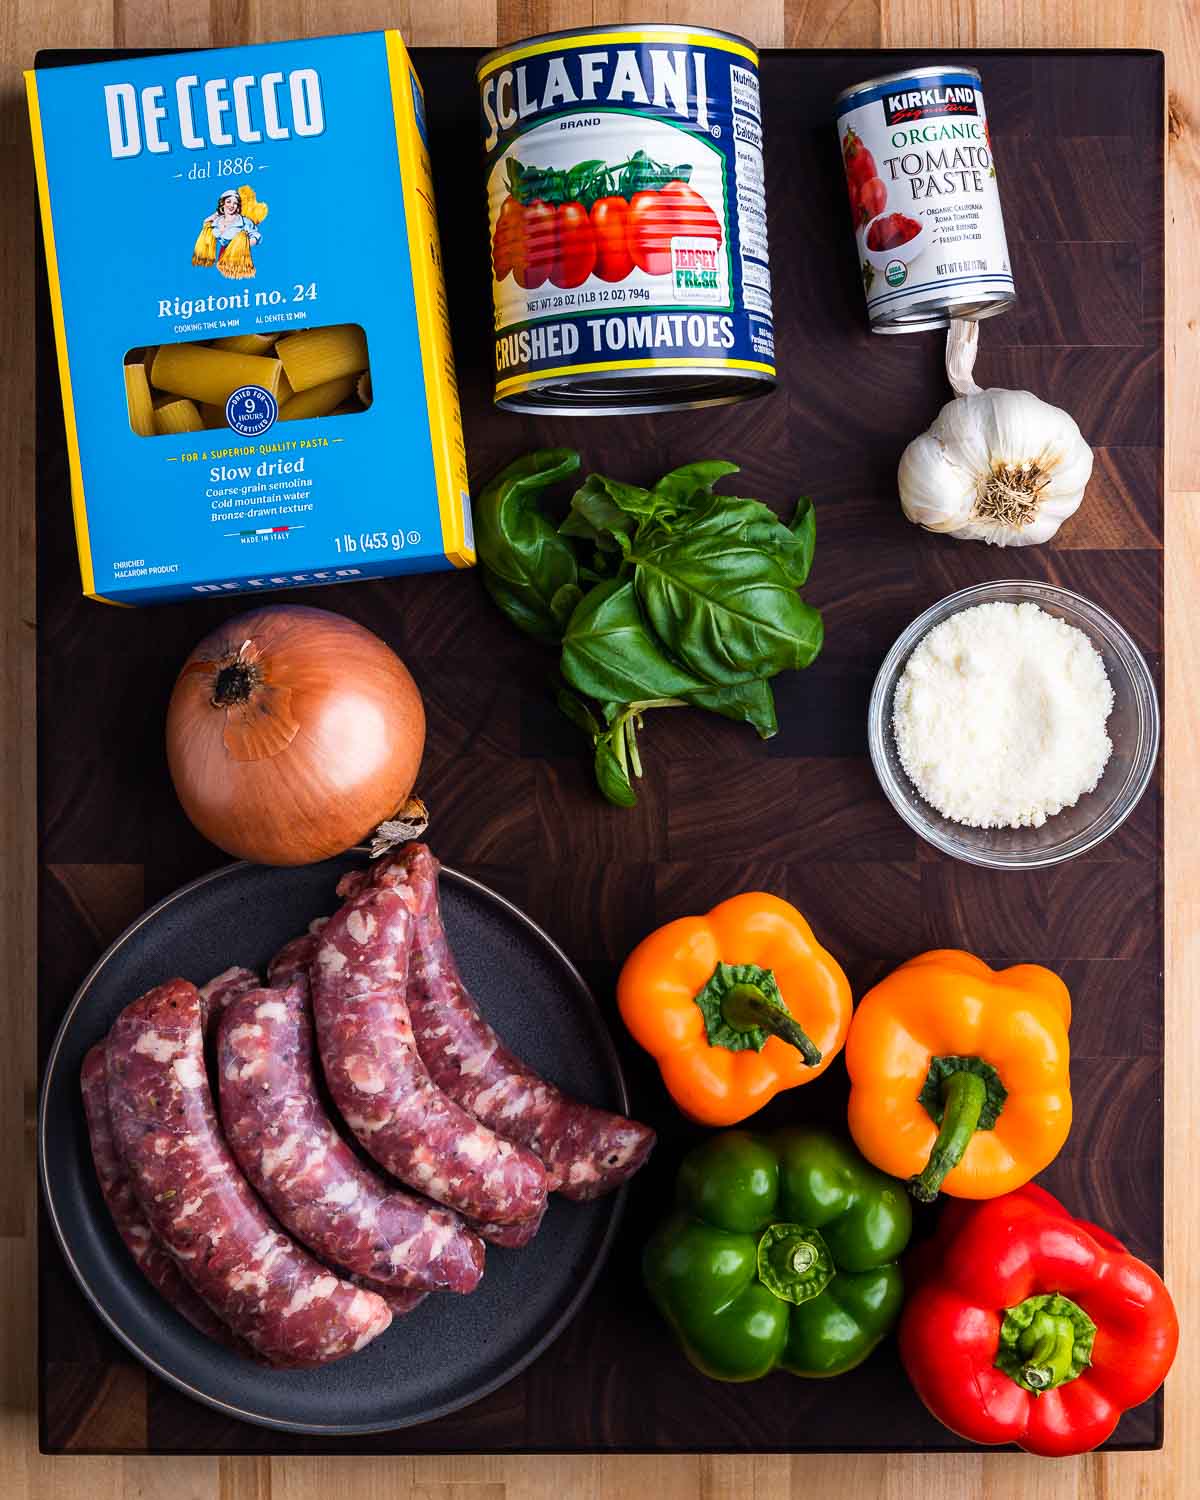 Ingredients shown: rigatoni, can tomatoes, basil, garlic, Pecorino, onion, sausage, and bell peppers.